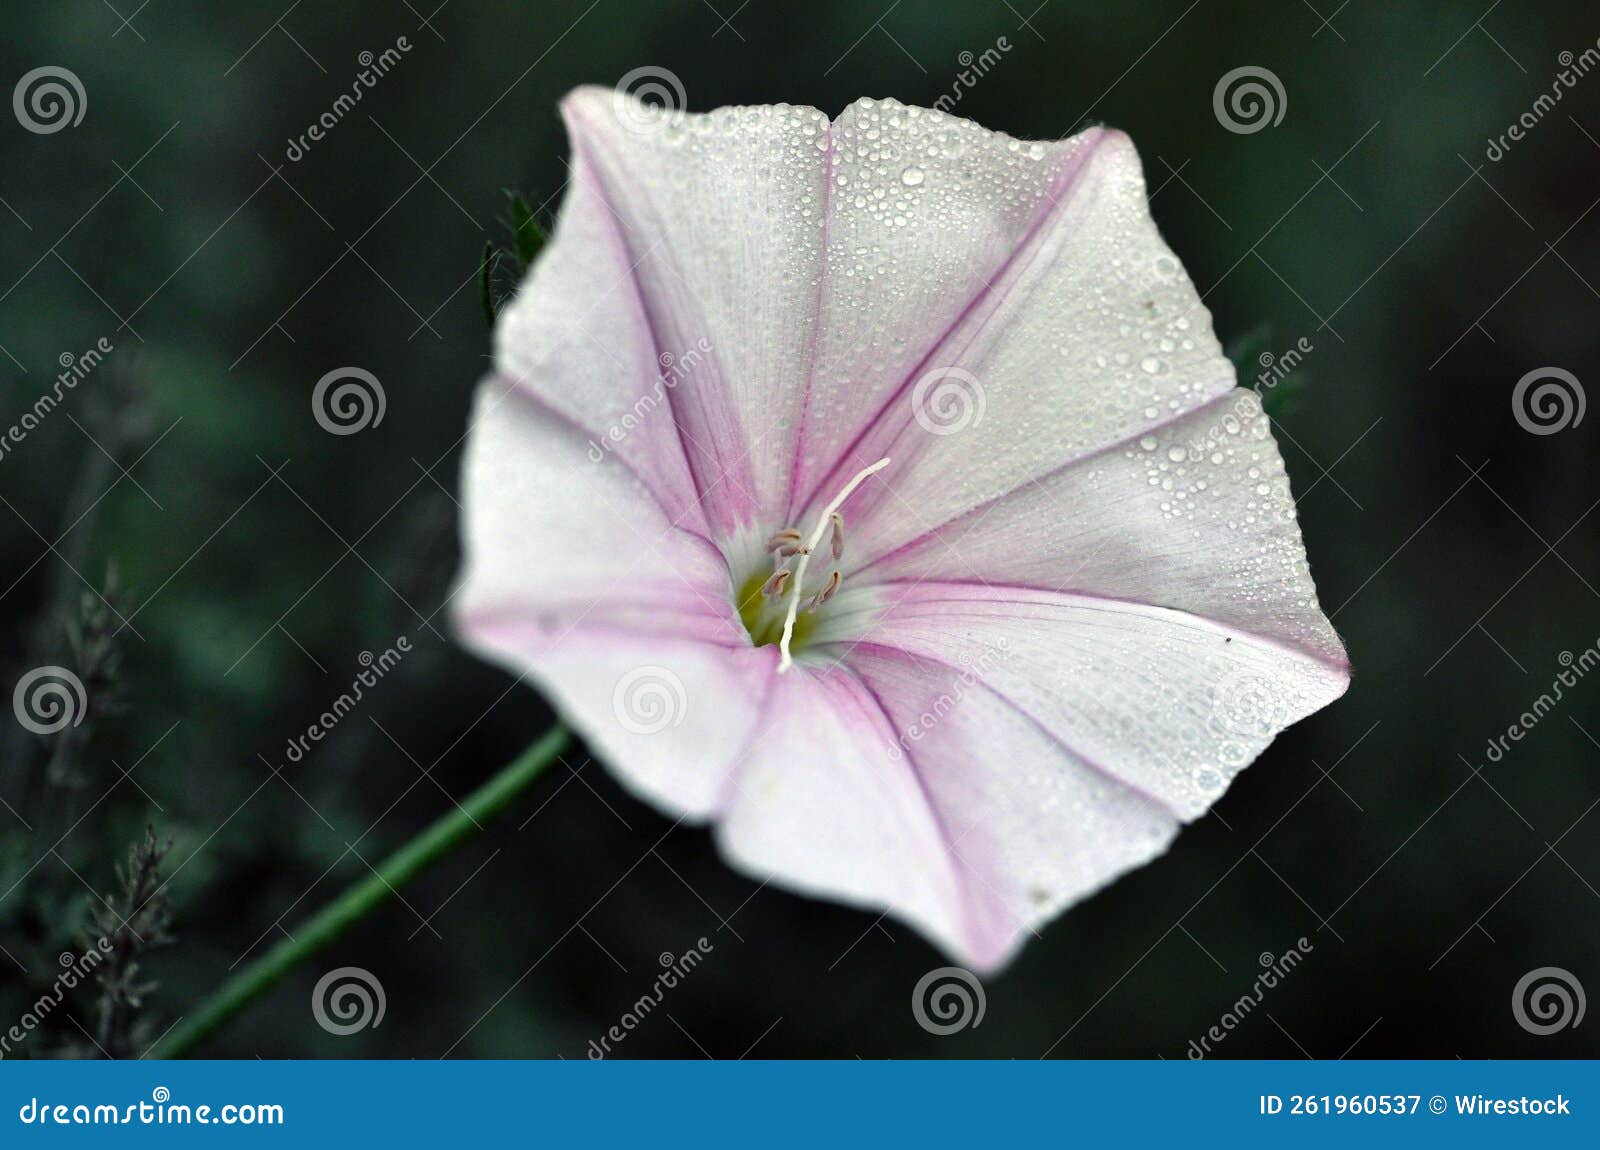 macro shot of a convolvulus cantabrica flower on a soft blurry background